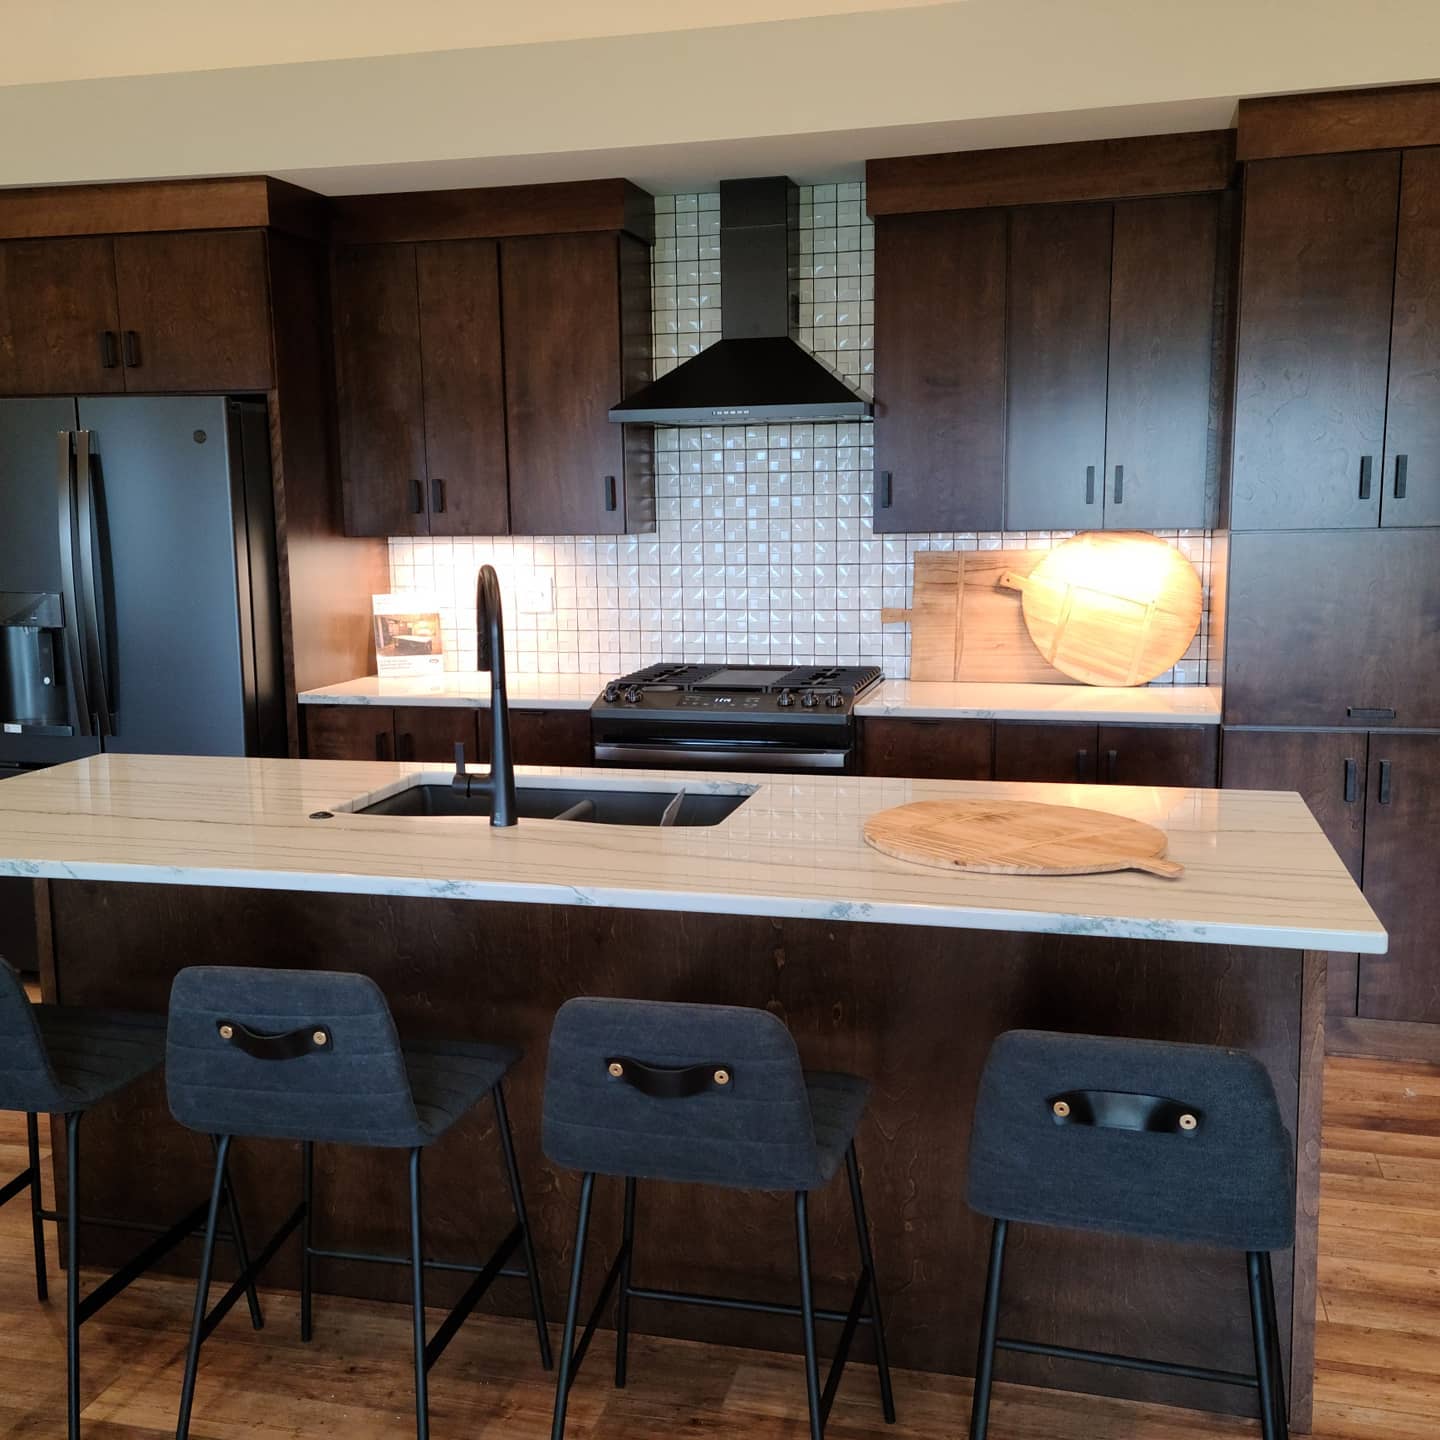 Kitchen Countertops in Sioux Falls, SD